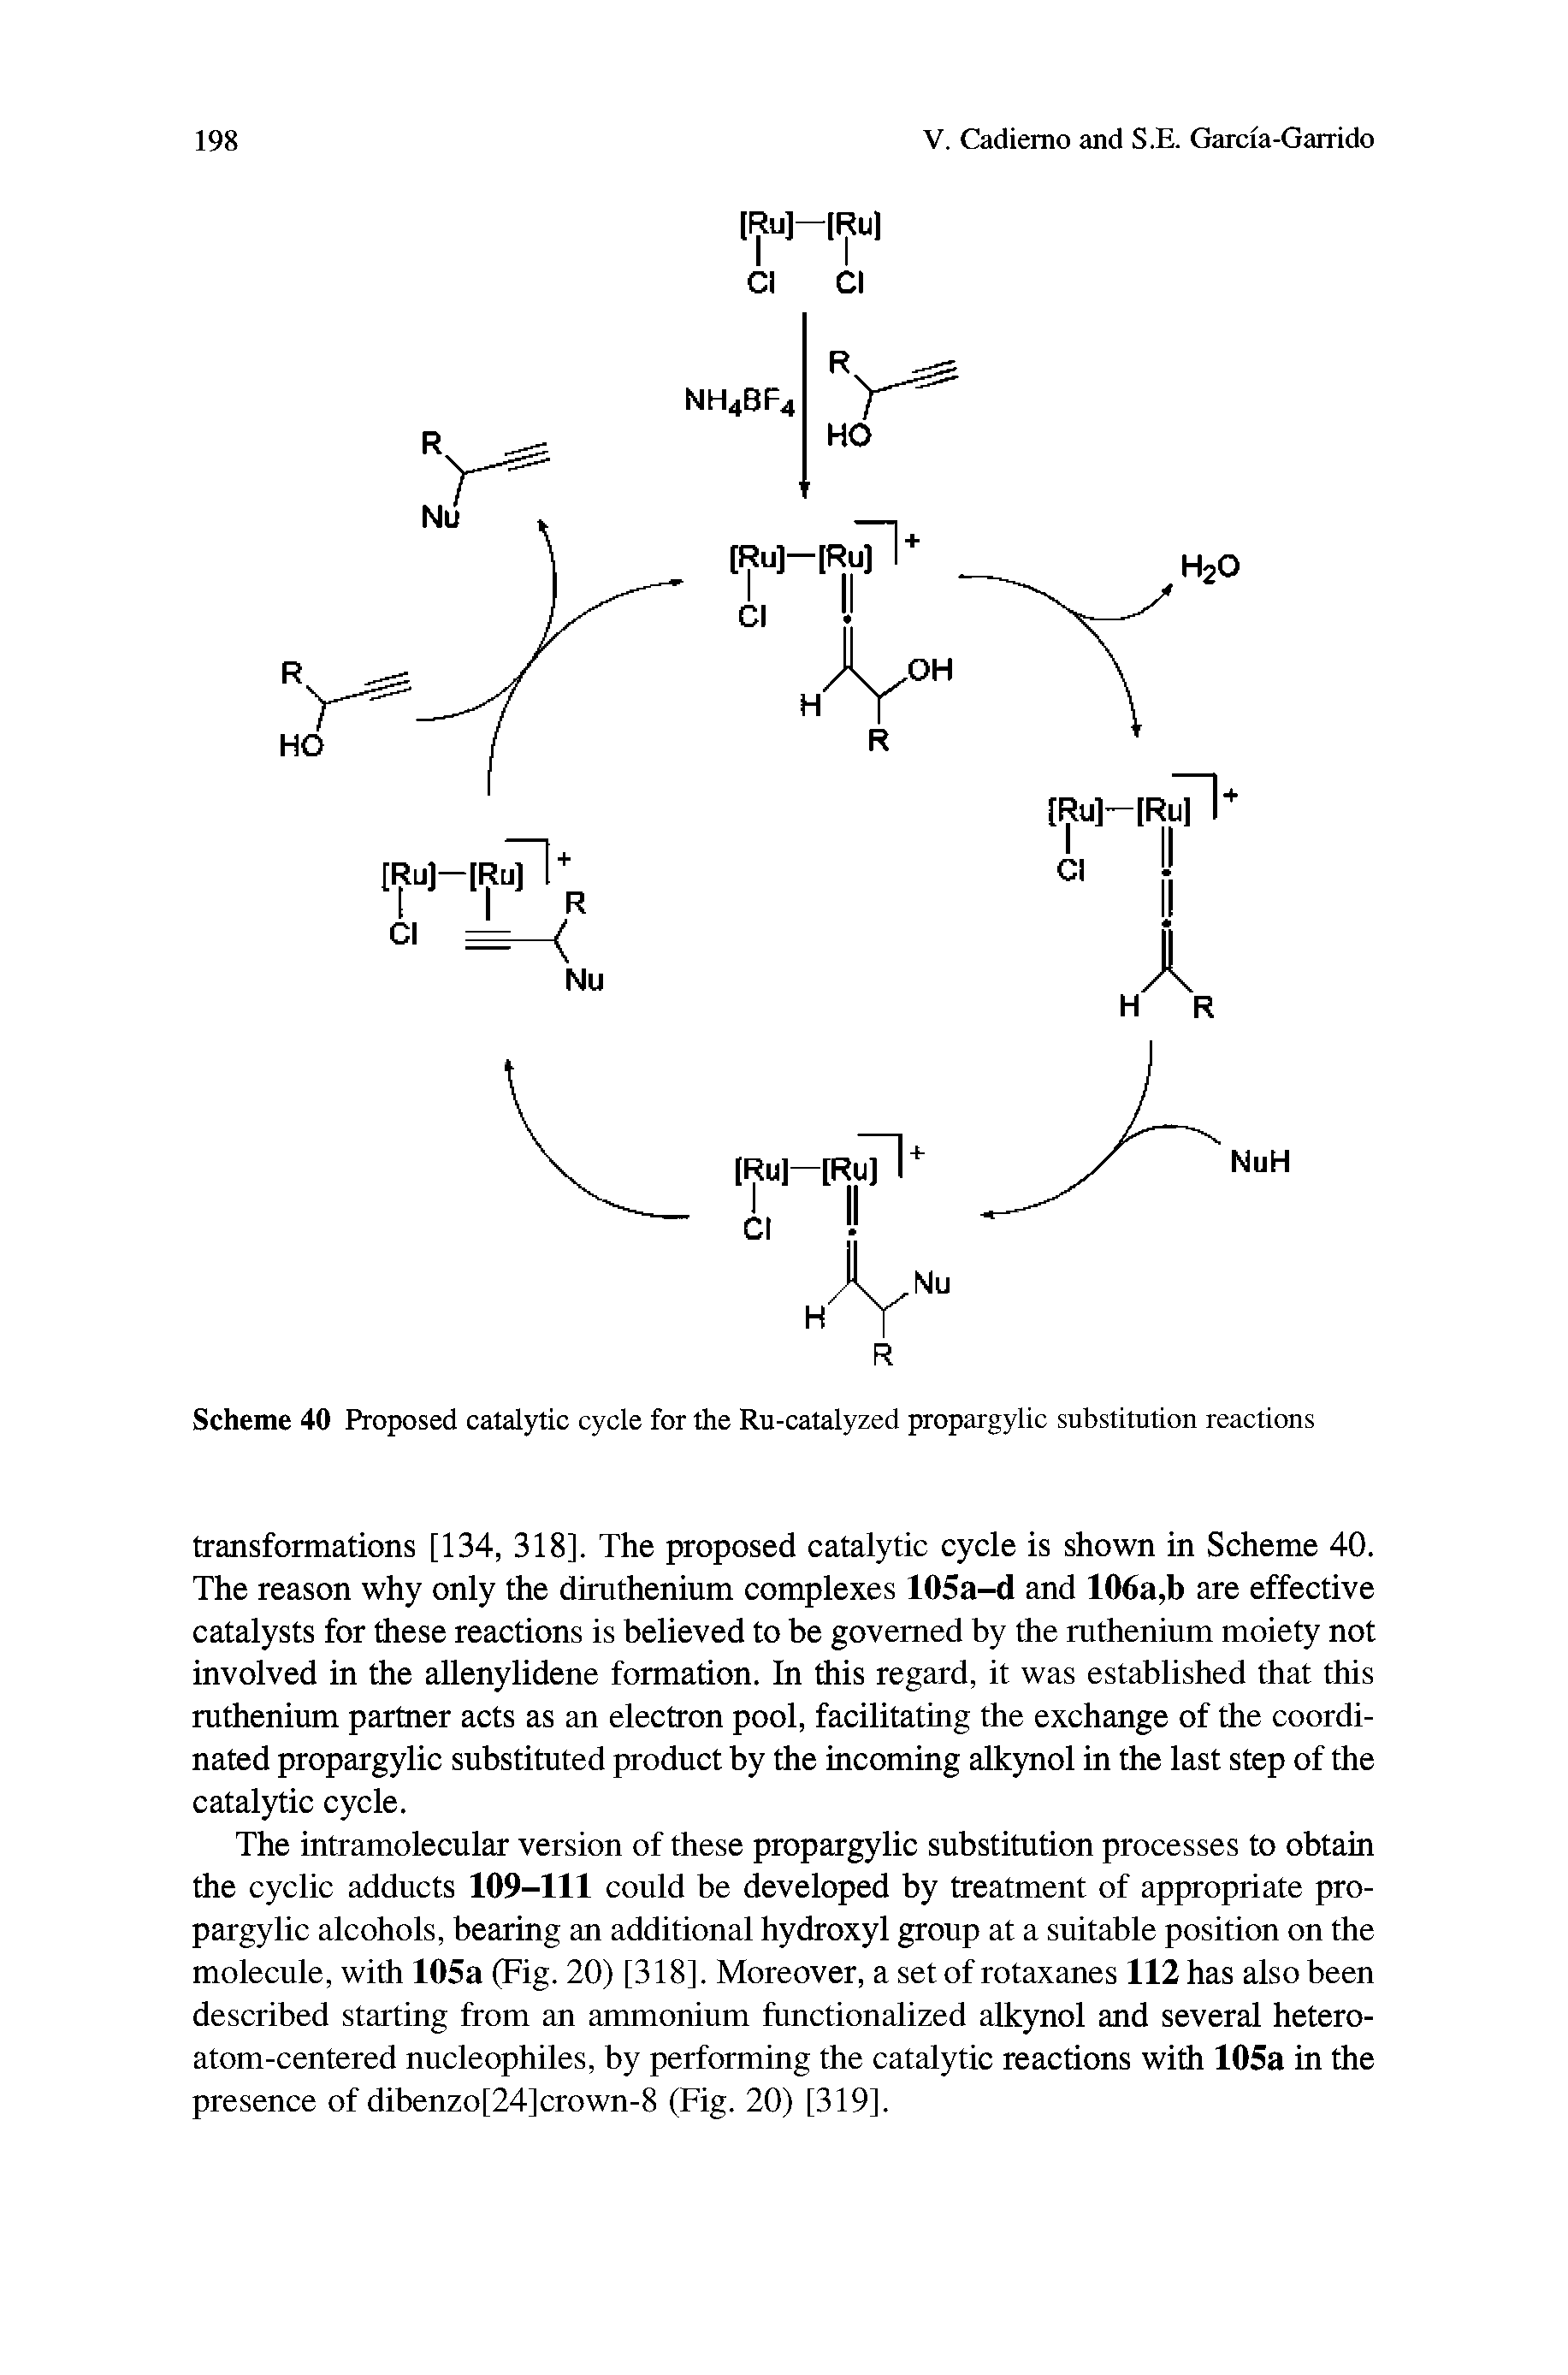 Scheme 40 Proposed catalytic cycle for the Ru-catalyzed propargylic substitution reactions...